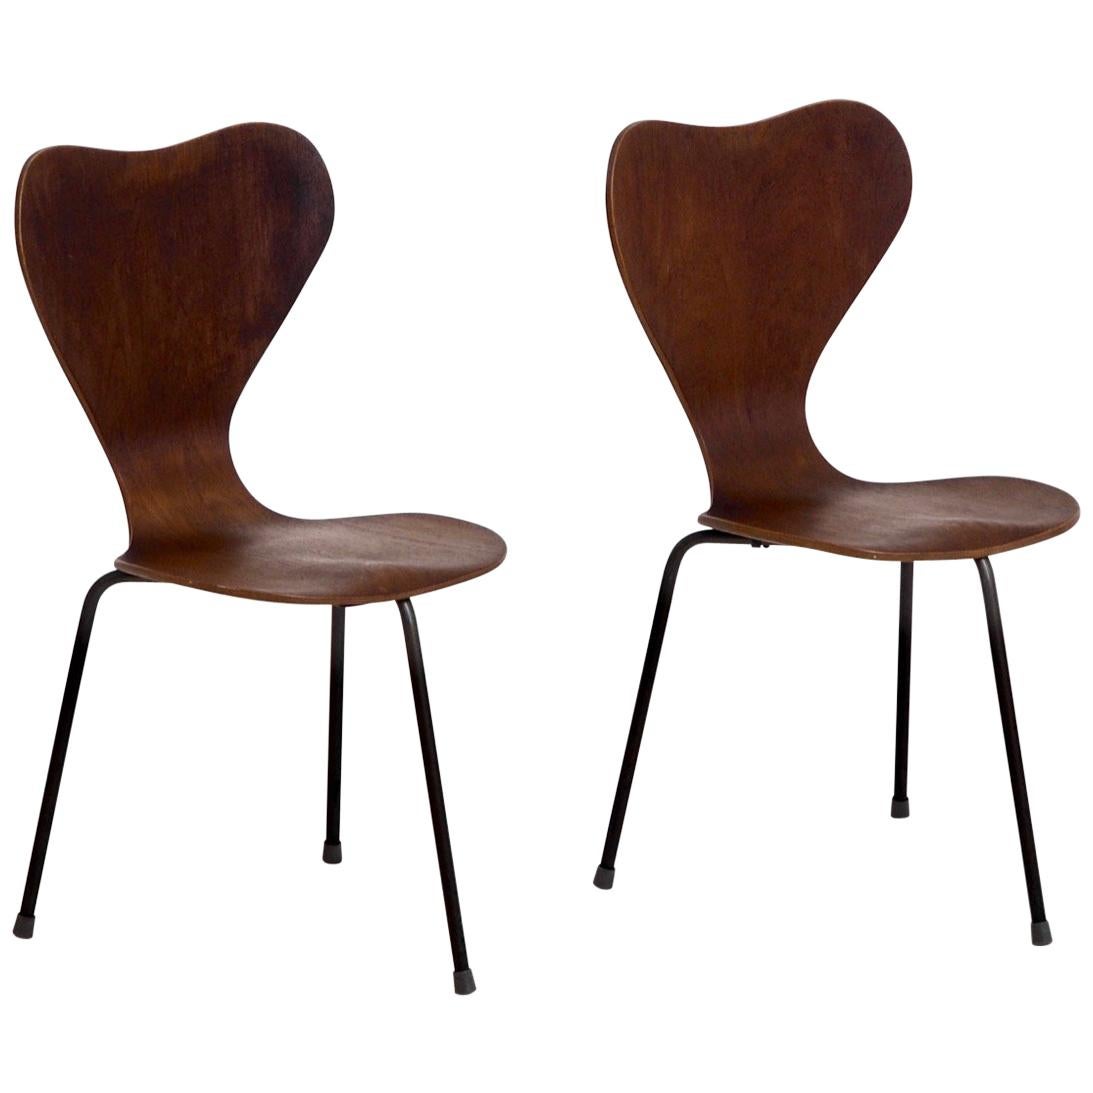 Pair of Teak Wood Chairs with Three Iron Legs, Danish Architect, 1960s For Sale